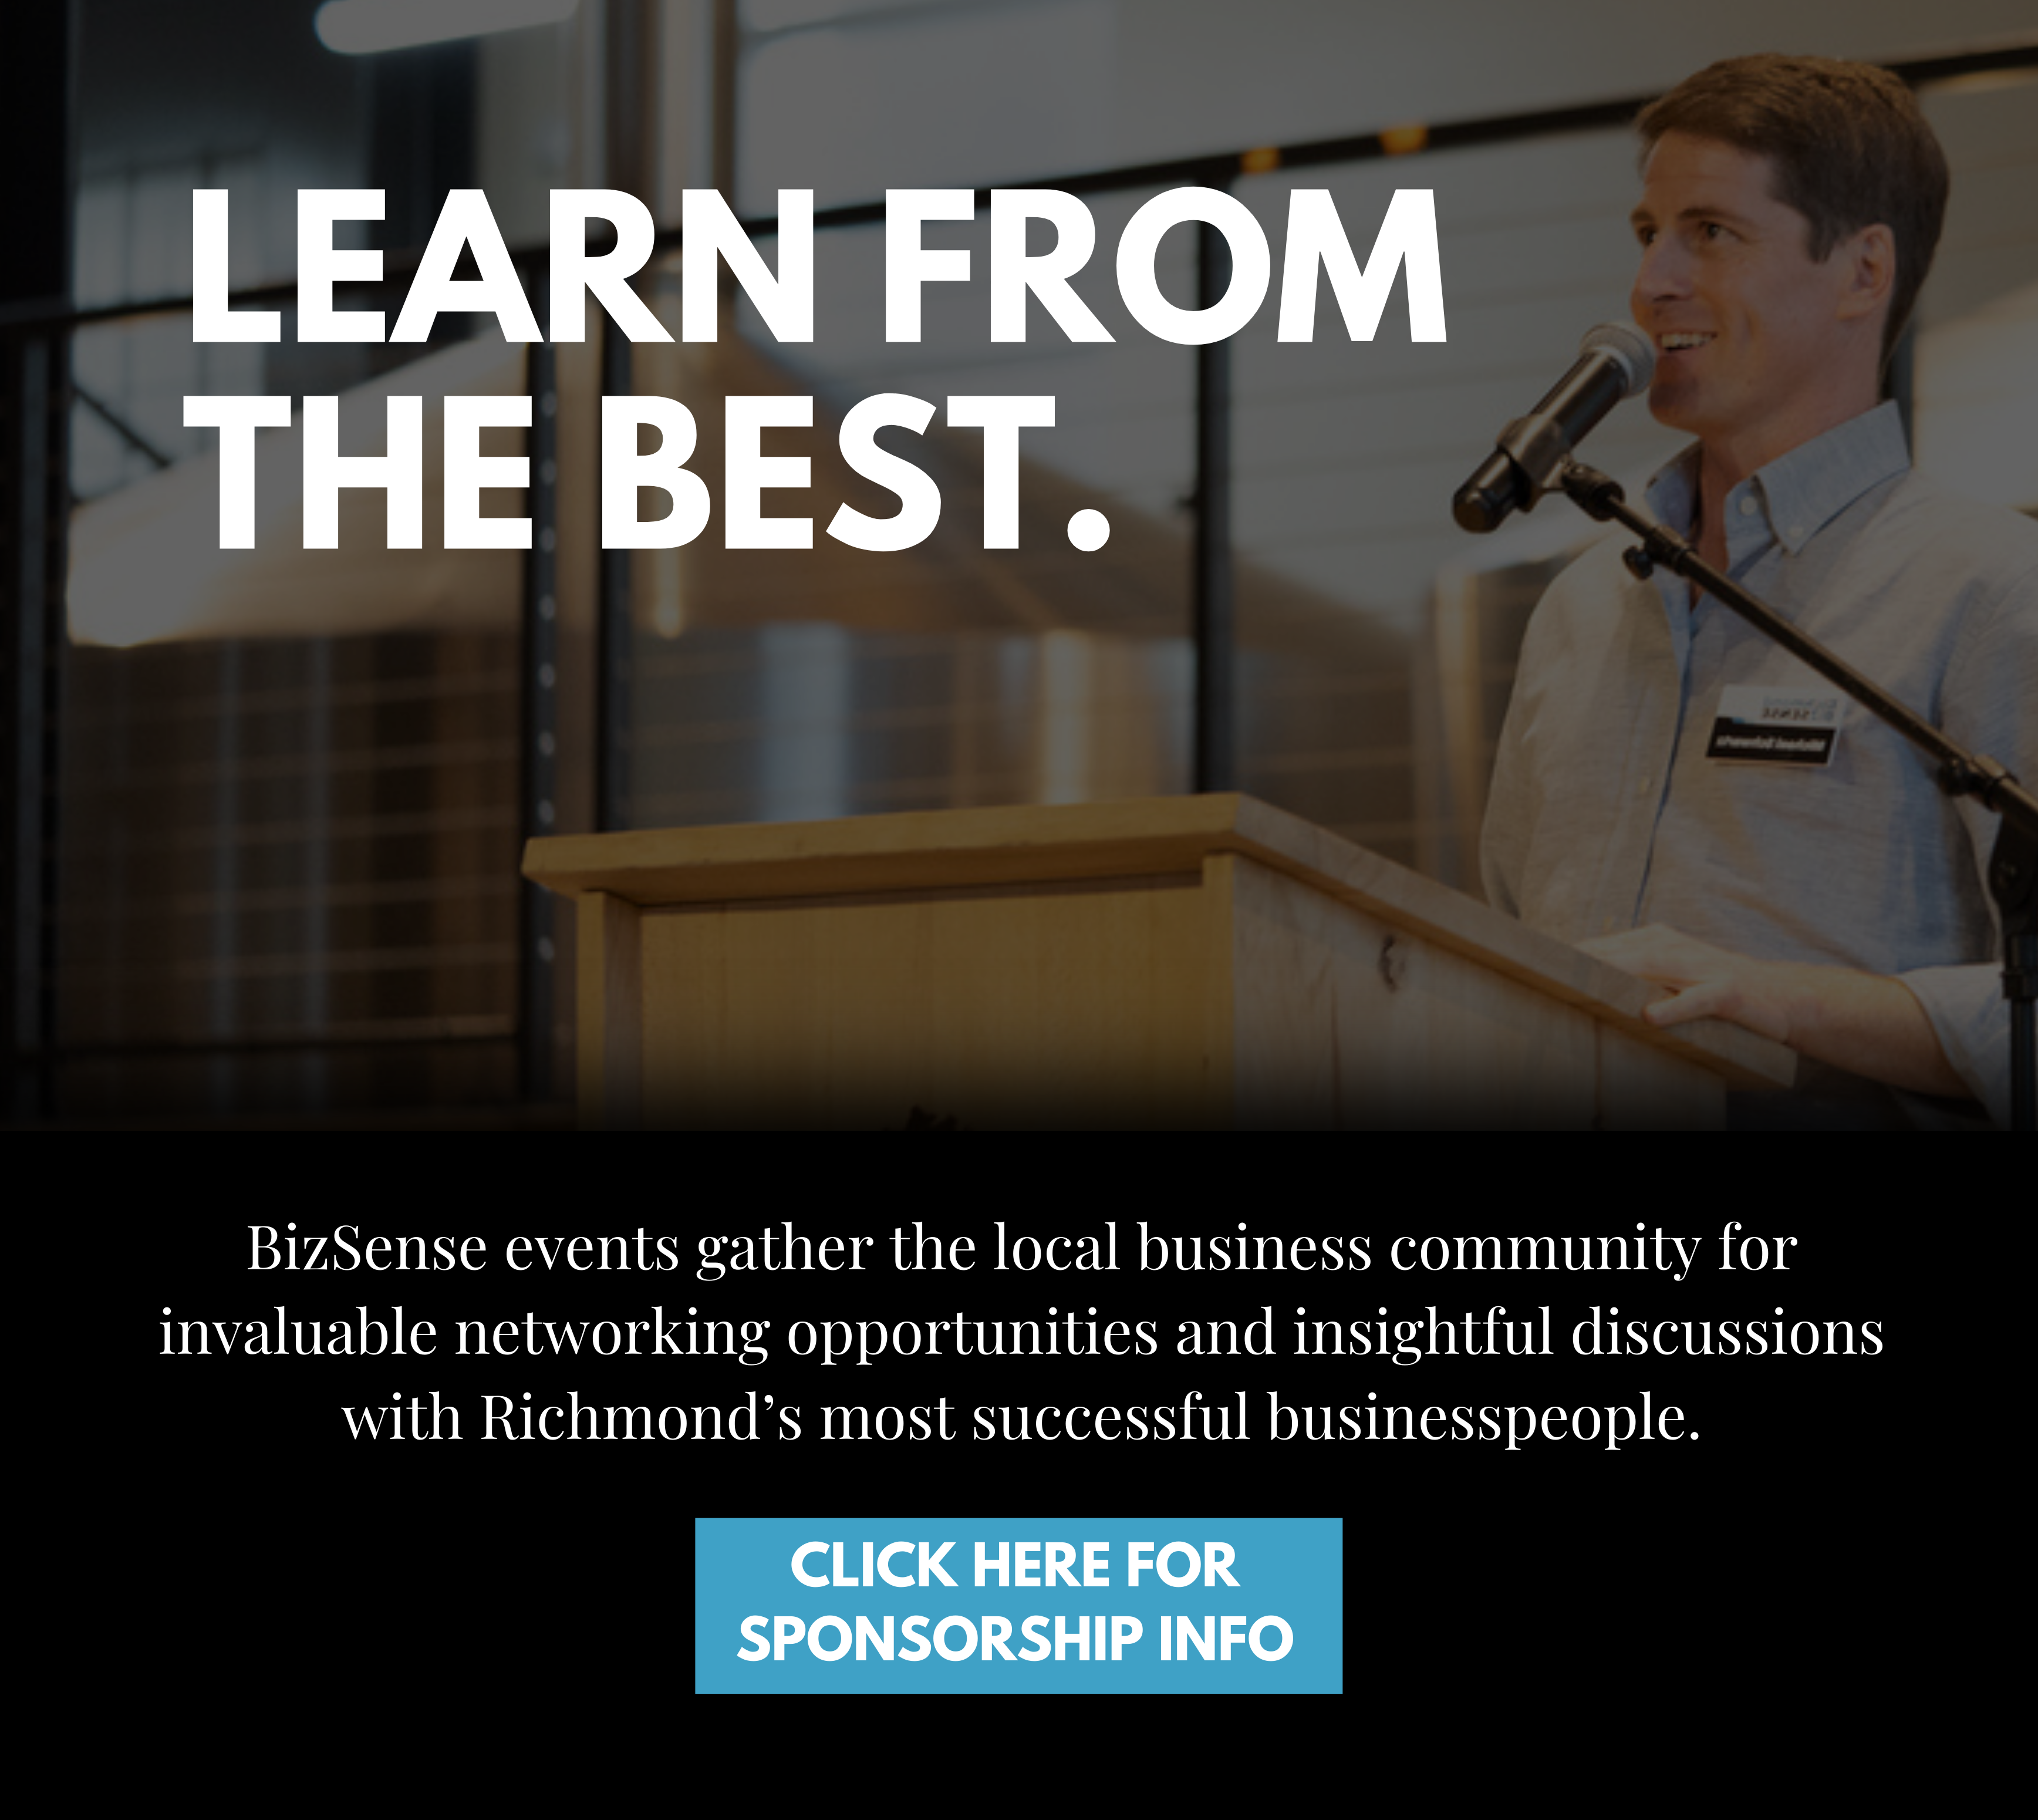 Richmond BizSense Events Learn from the best